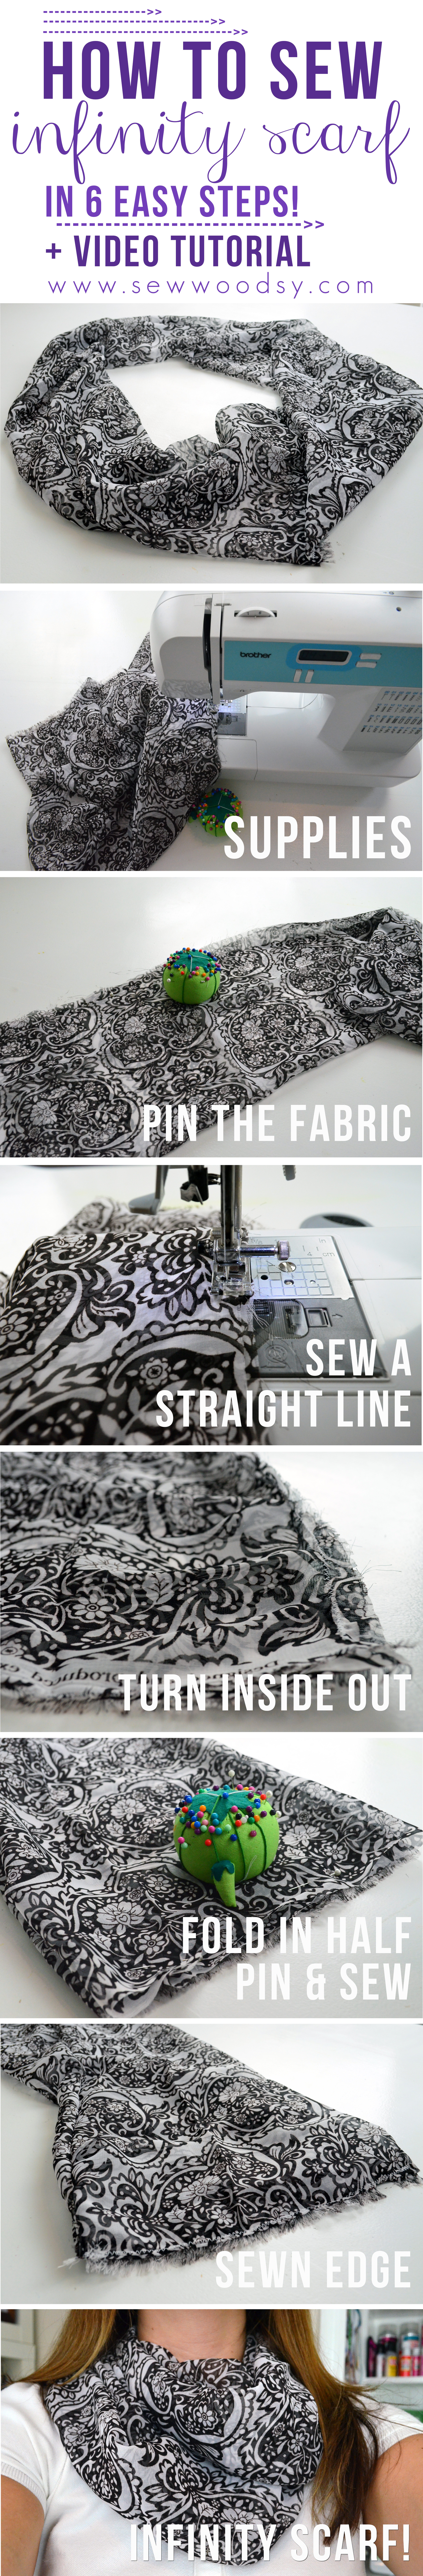 Click this photo to learn how to sew an infinity scarf in just a few simple steps! SewWoodsy.com #sewing #crafts #diy